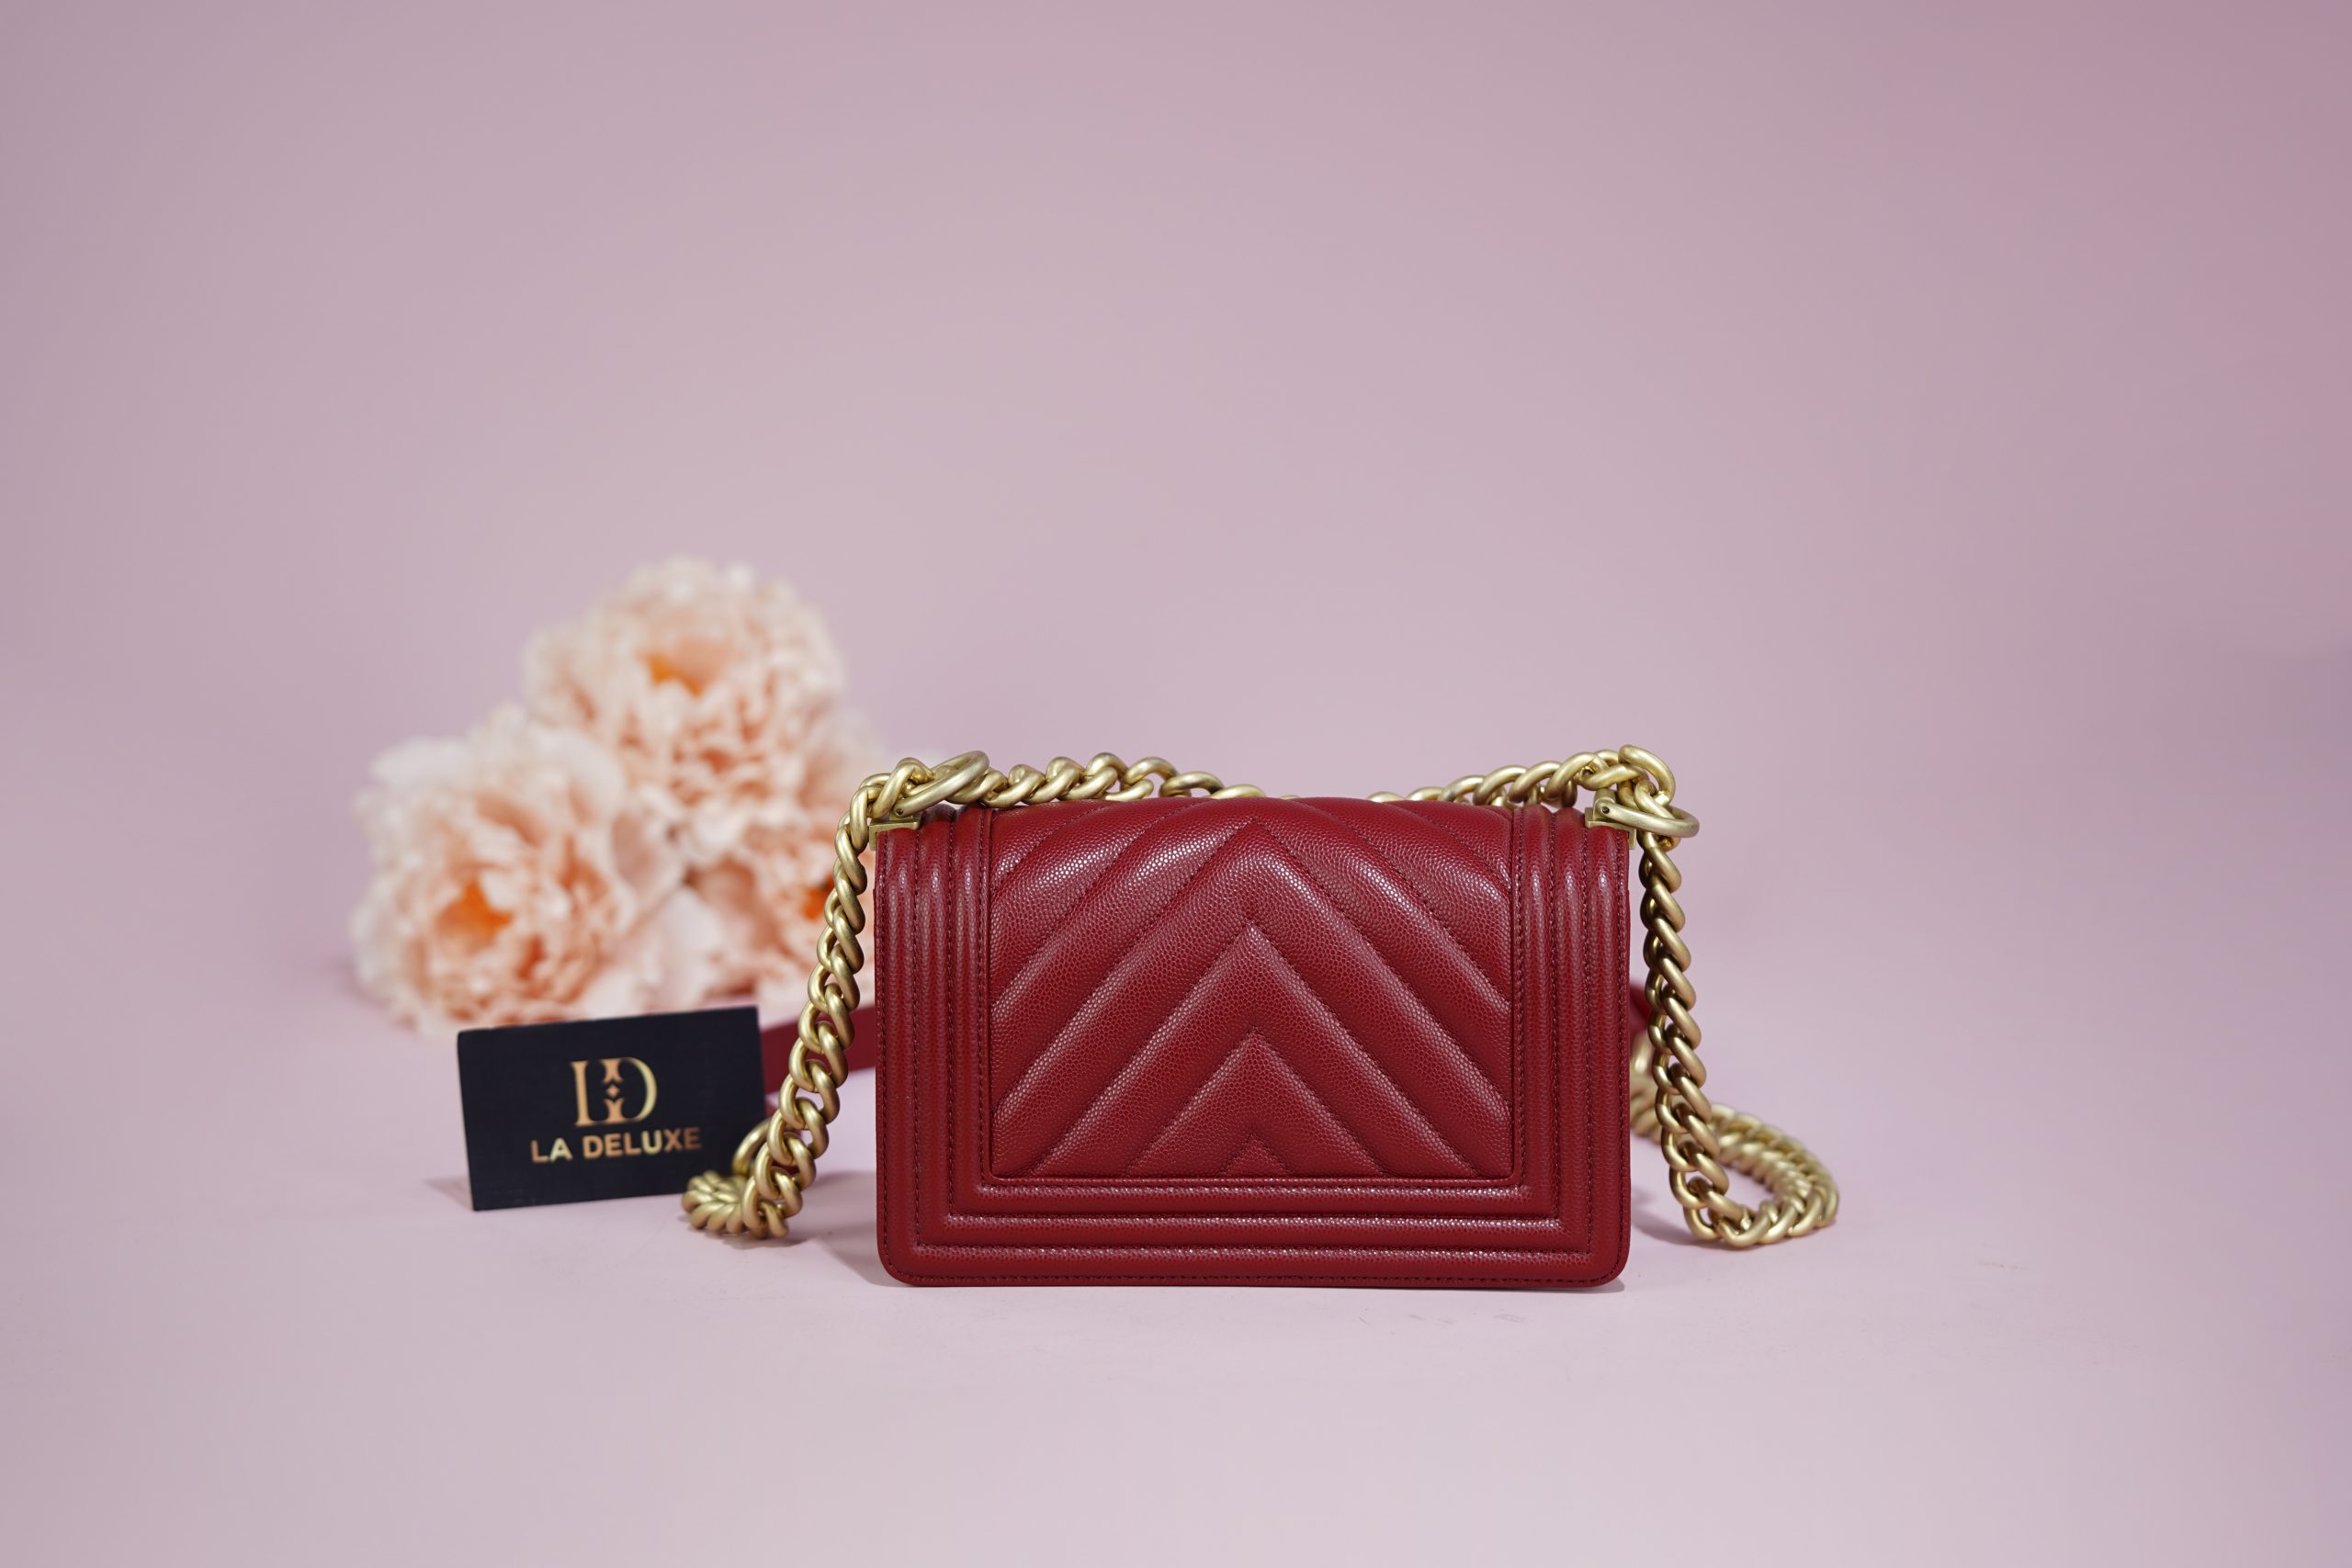 CHANEL Le Boy Small Lambskin Leather Shoulder Bag Red  Hot Deals